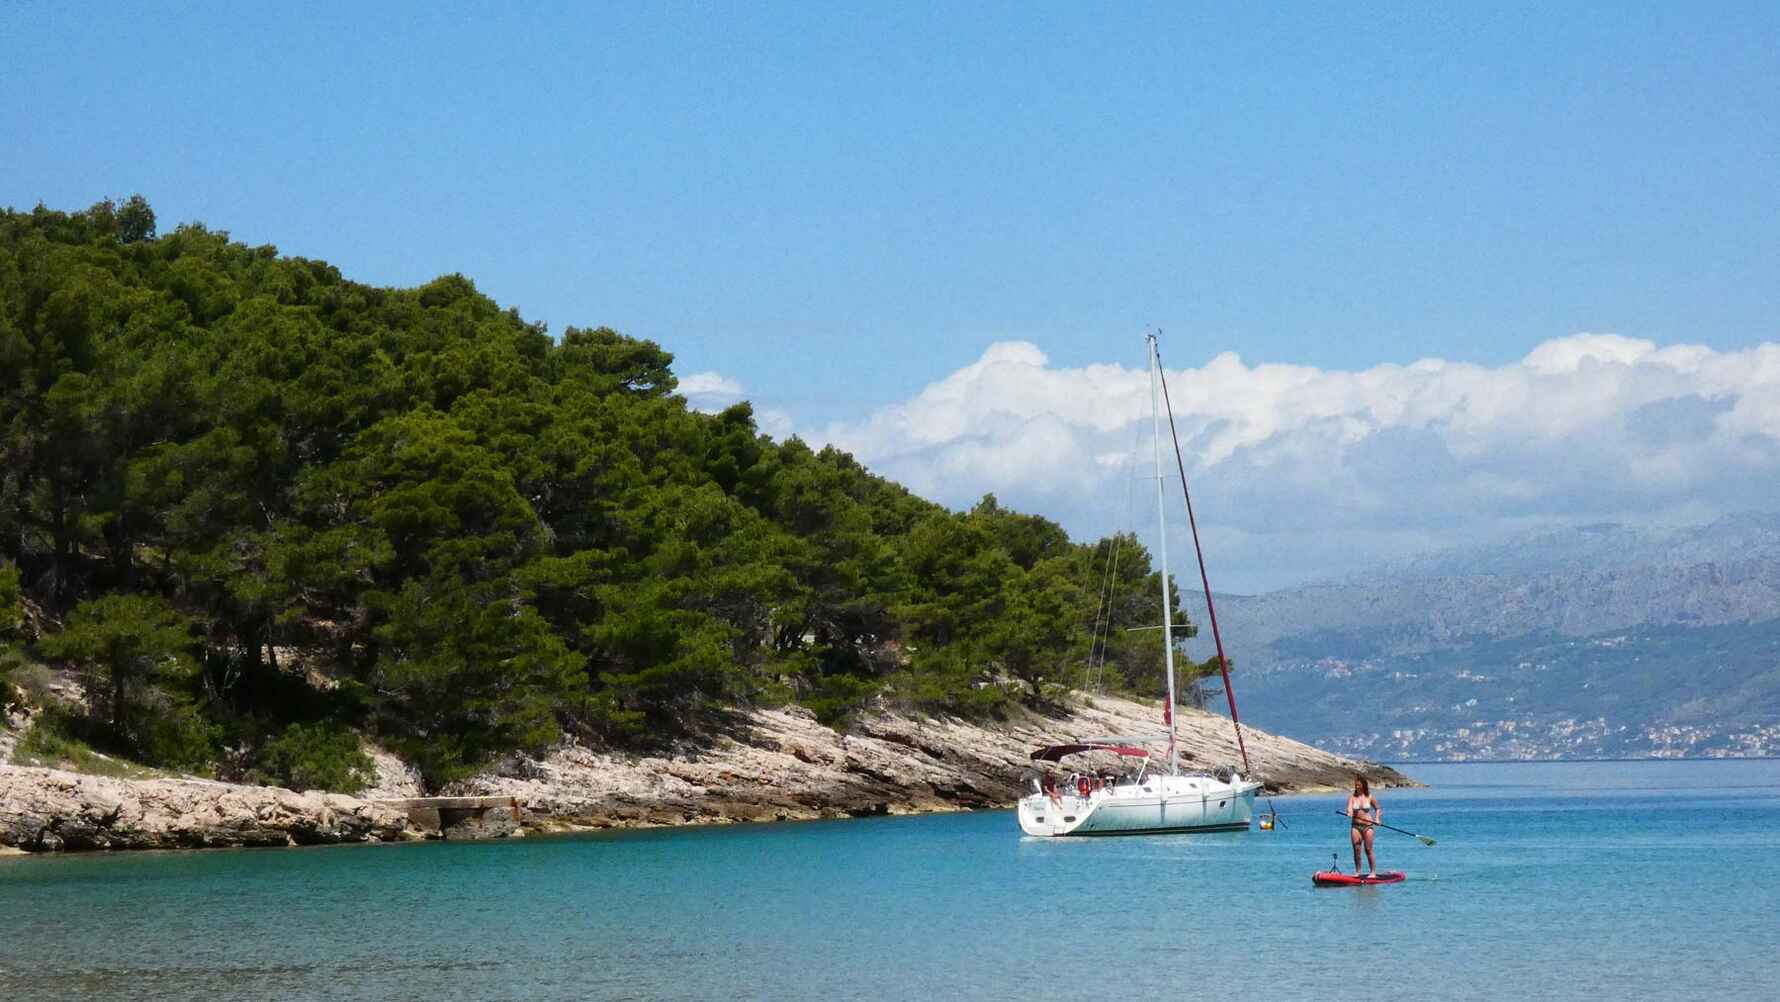 Paddleboarding next to a sailing boat near the island of Brac 